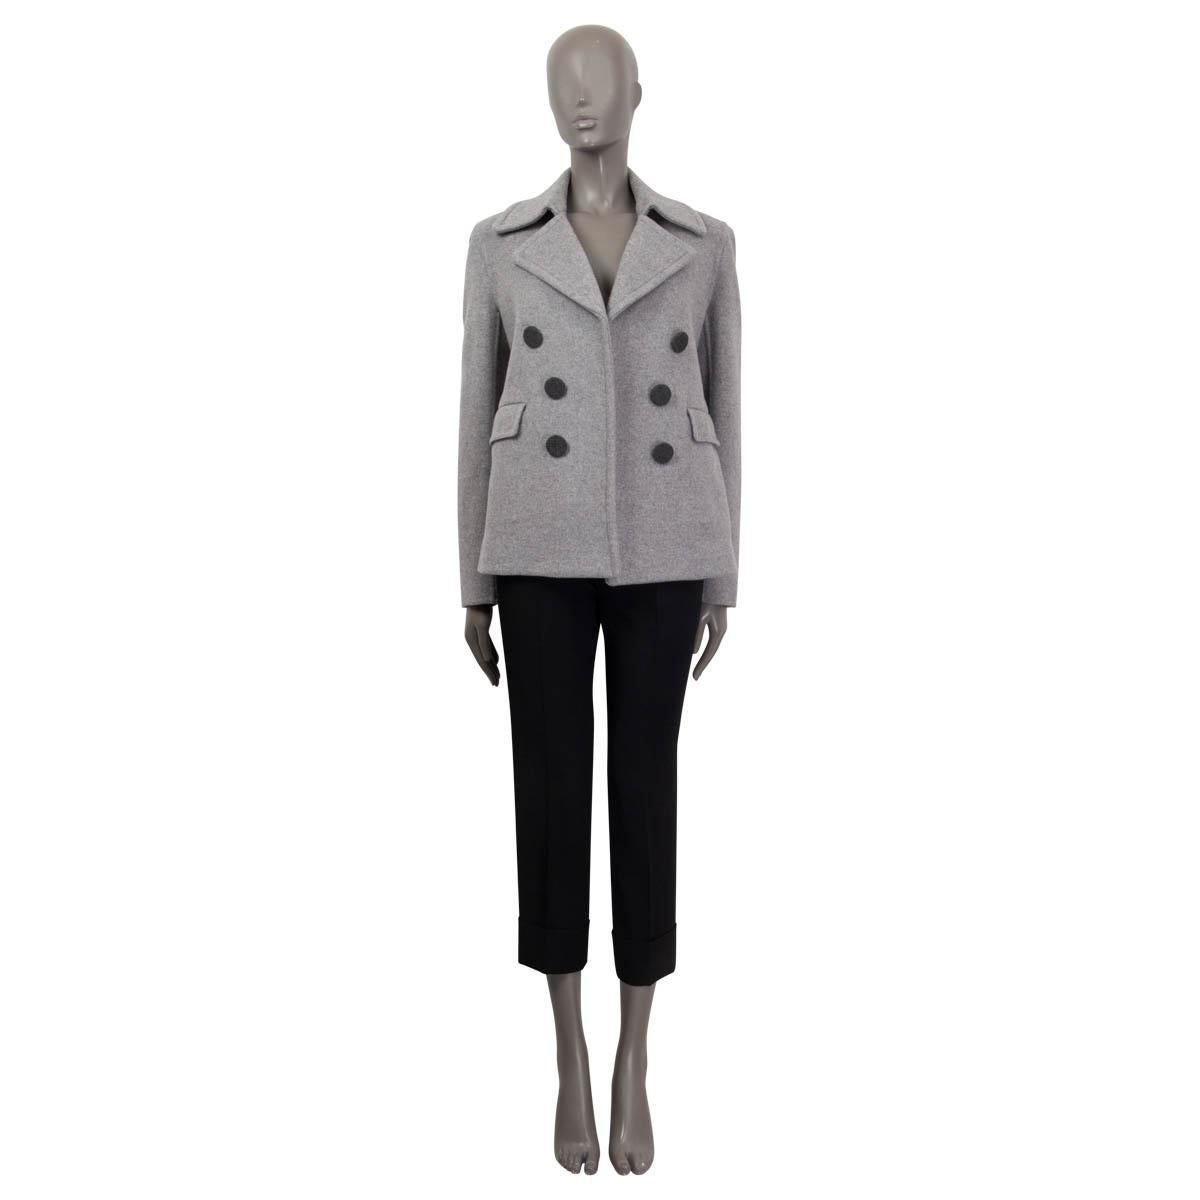 100% authentic Celine open front peacoat jacket in light gray cashmere (100%). Features two sewn shut flap pockets, slits on both sides and a notch collar. Partially lined in light gray silk (100%). Has been worn and is in excellent